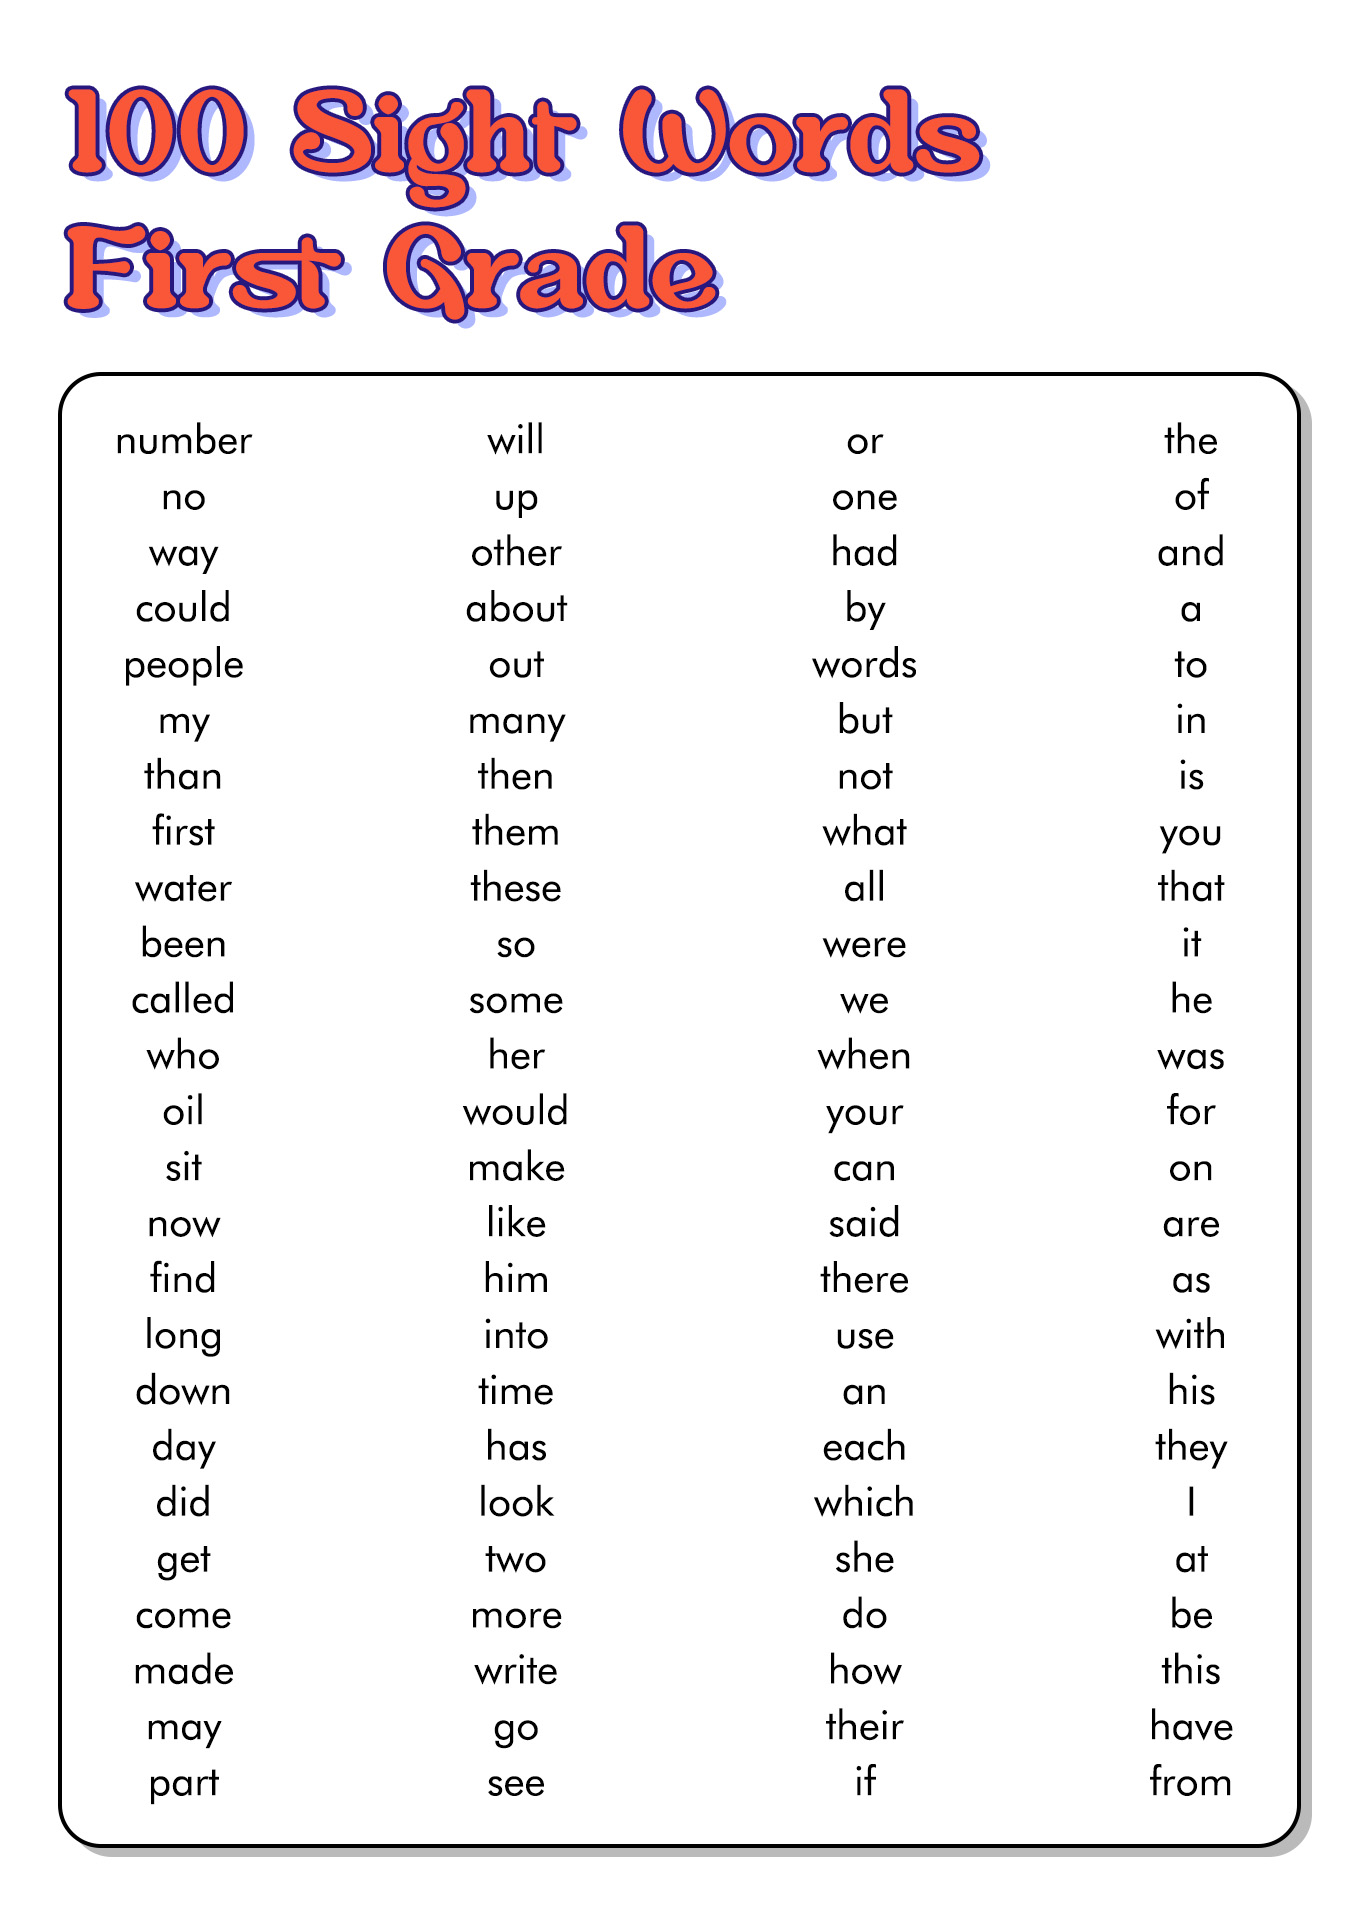 14 Best Images of First 100 Sight Words Printable ...